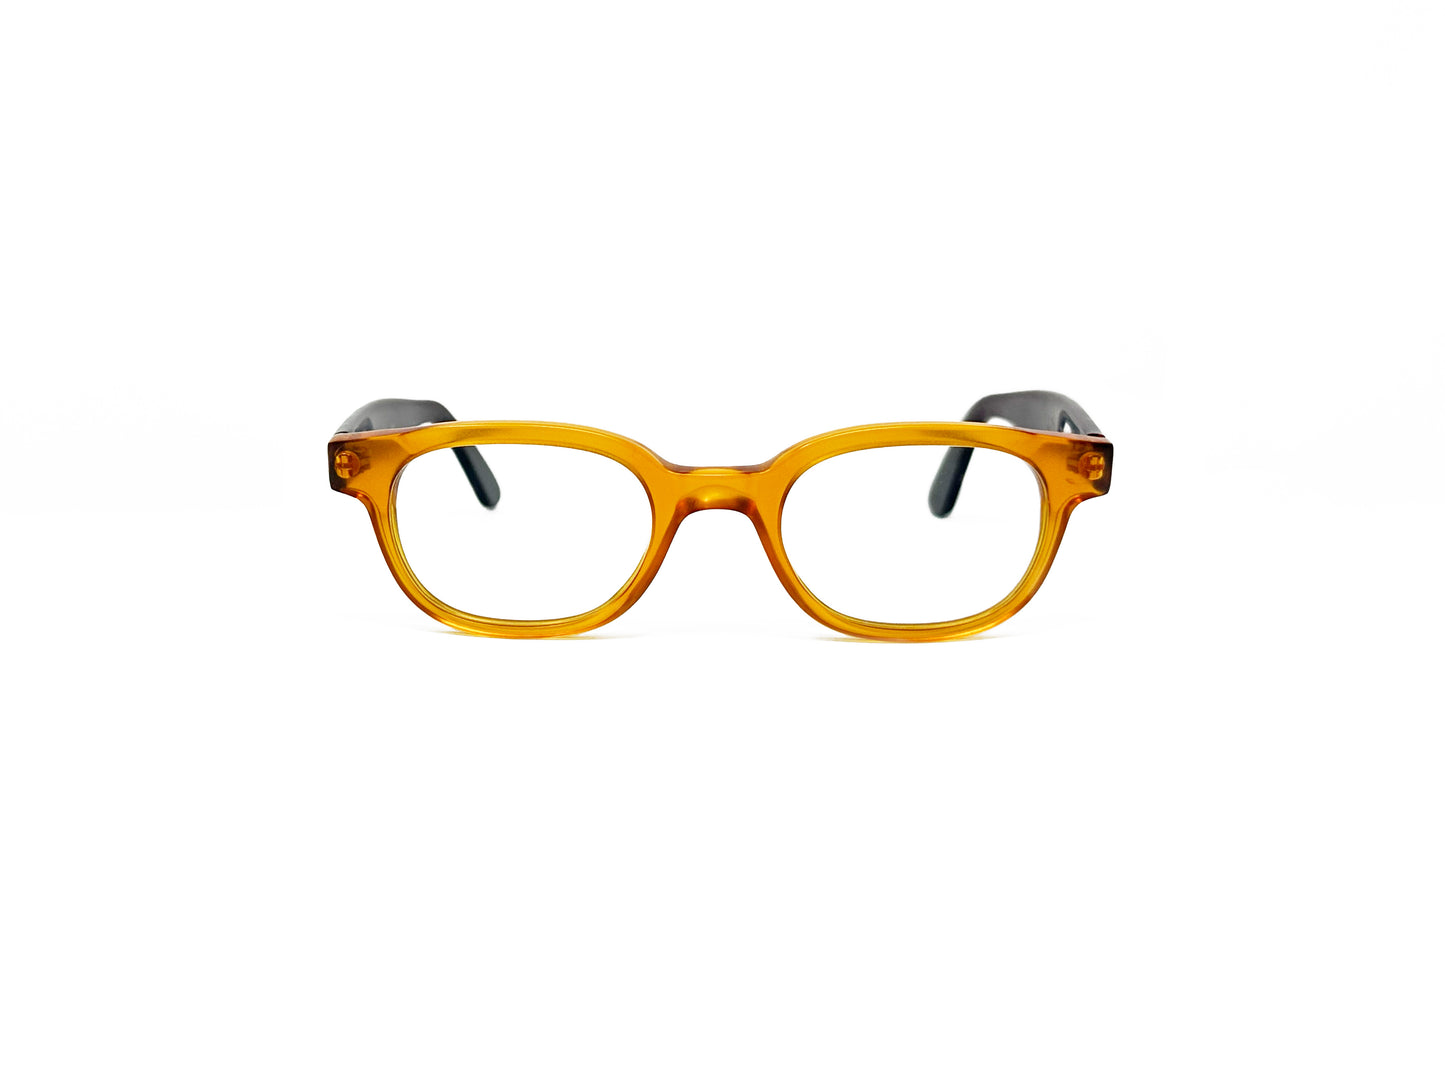 Viktlos rectangular acetate optical frame. Model: 2582. Color: 2539S/2499S - Transparent honey yellow with purple checkered temples. Front view. 